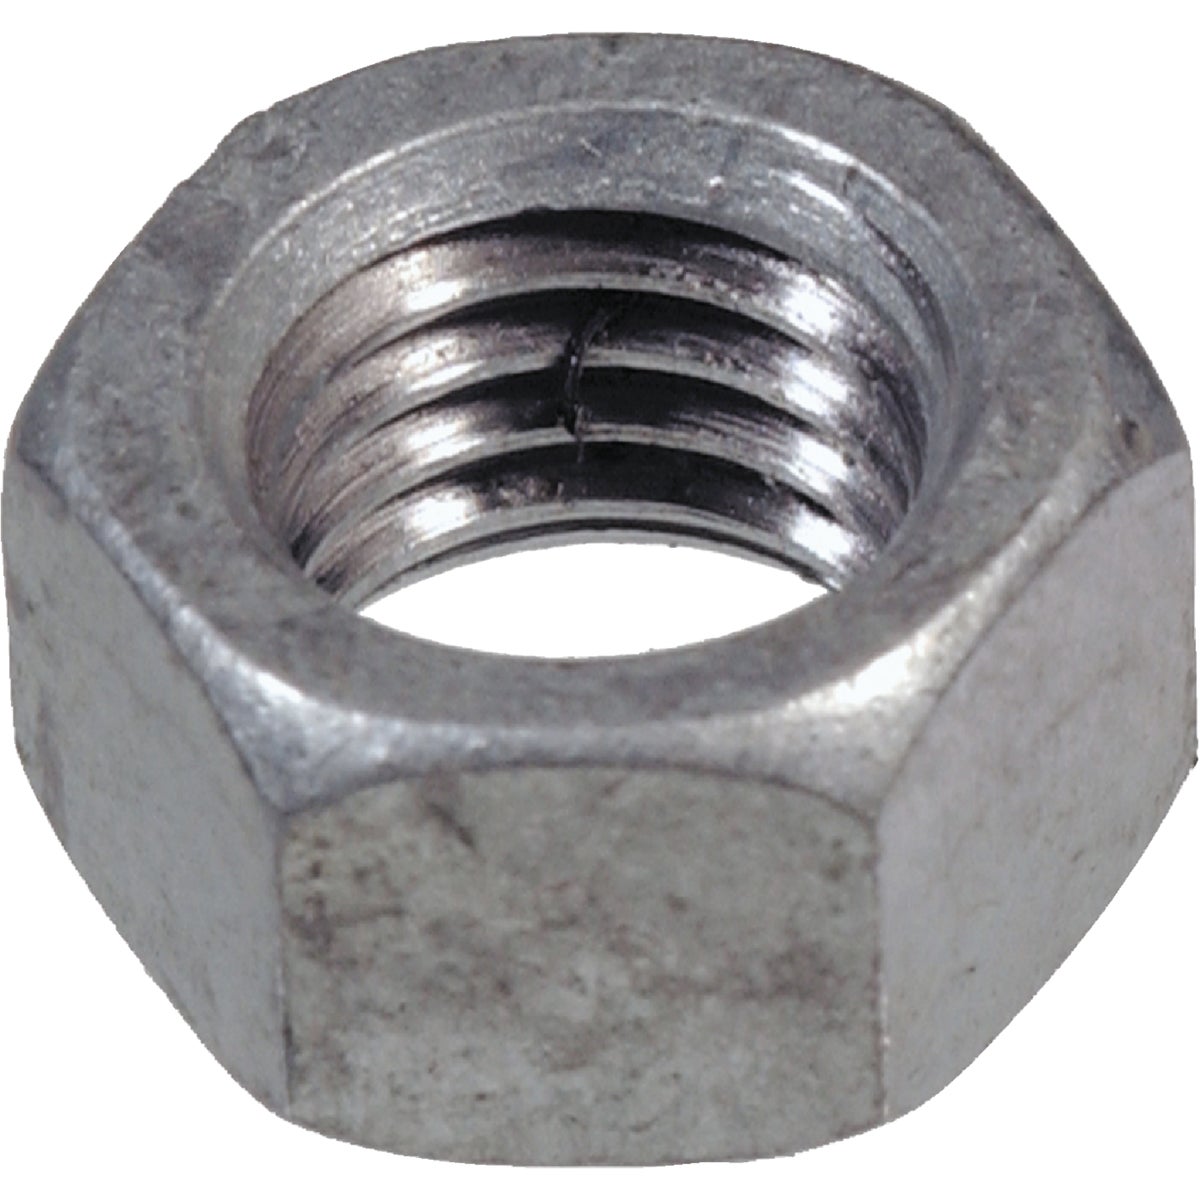 Item 725579, Hex nuts are to be used with machine bolts to adhere facing materials to 